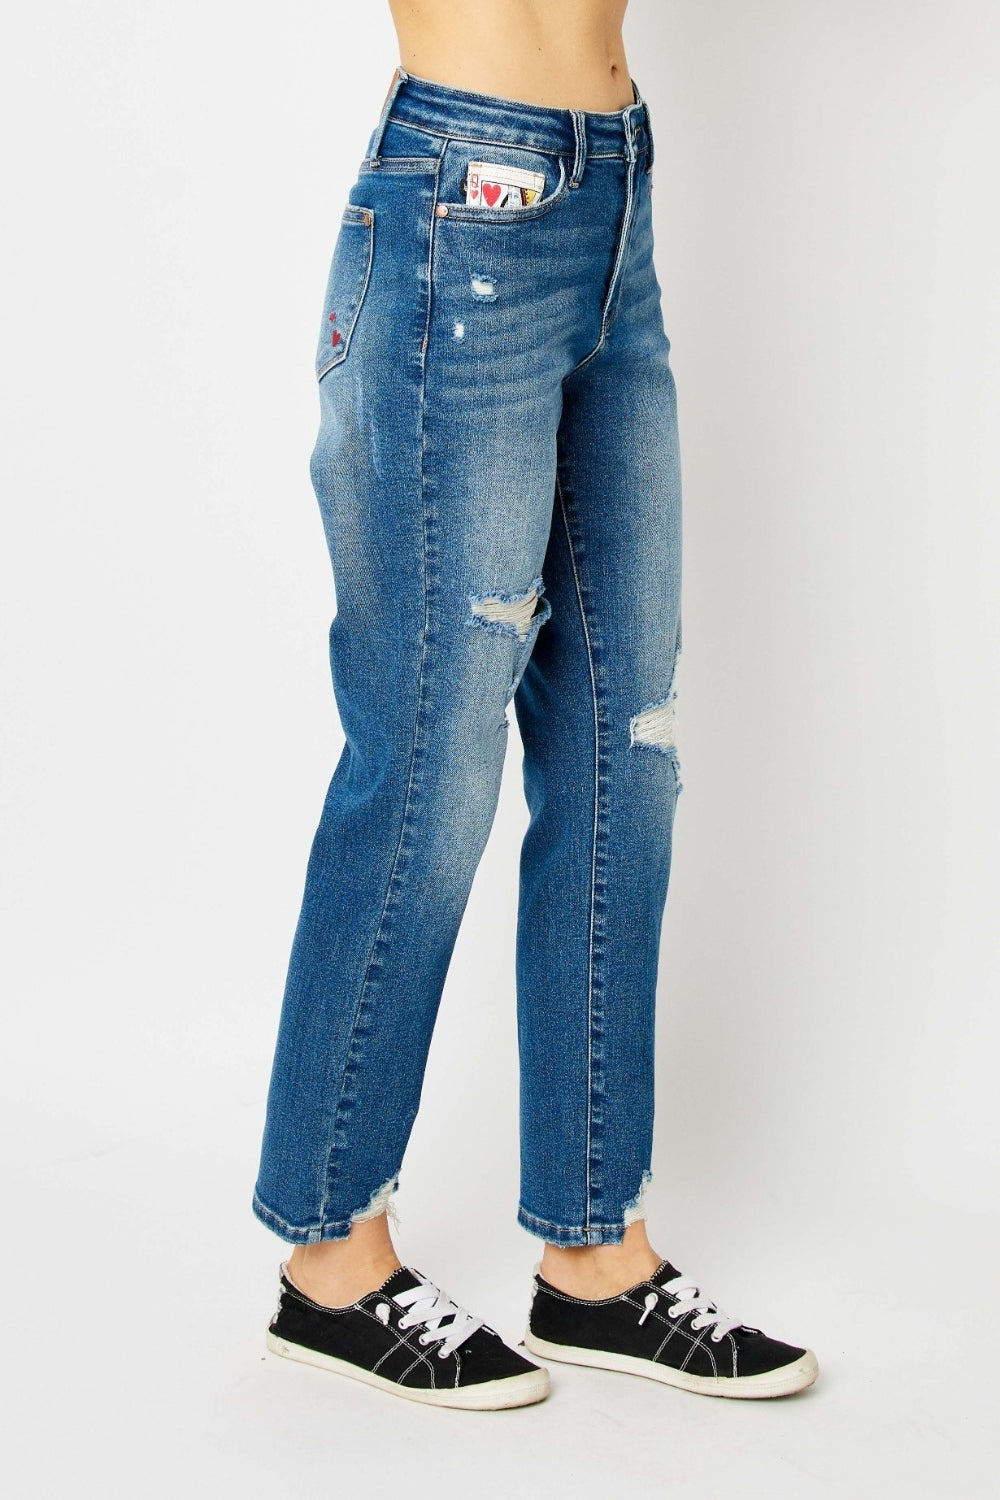 Judy Blue Full Size Queen Of Hearts Coin Pocket BF Jeans